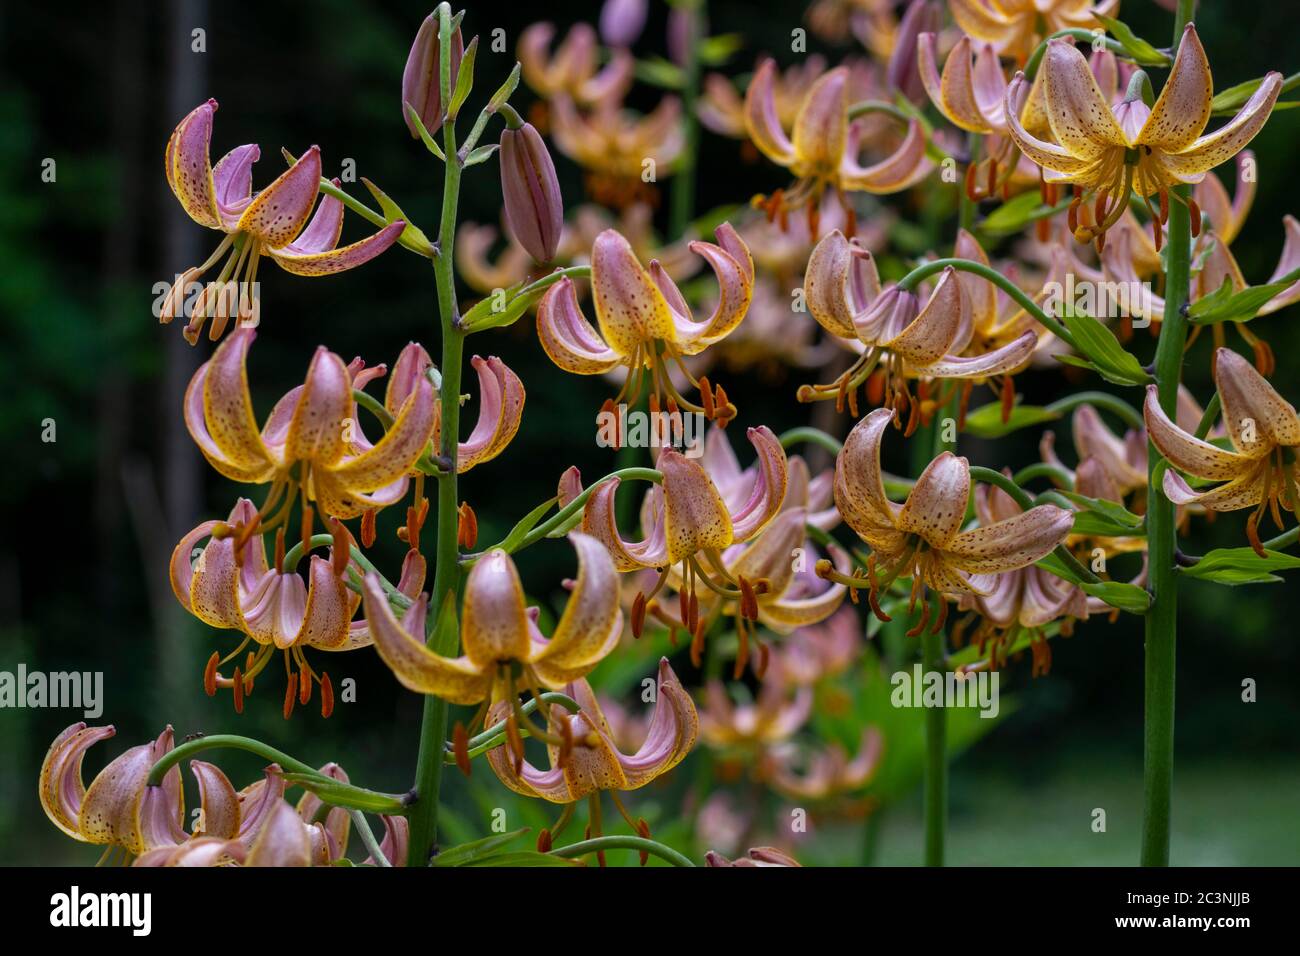 A group of lily flowers, Gay Light Stock Photo